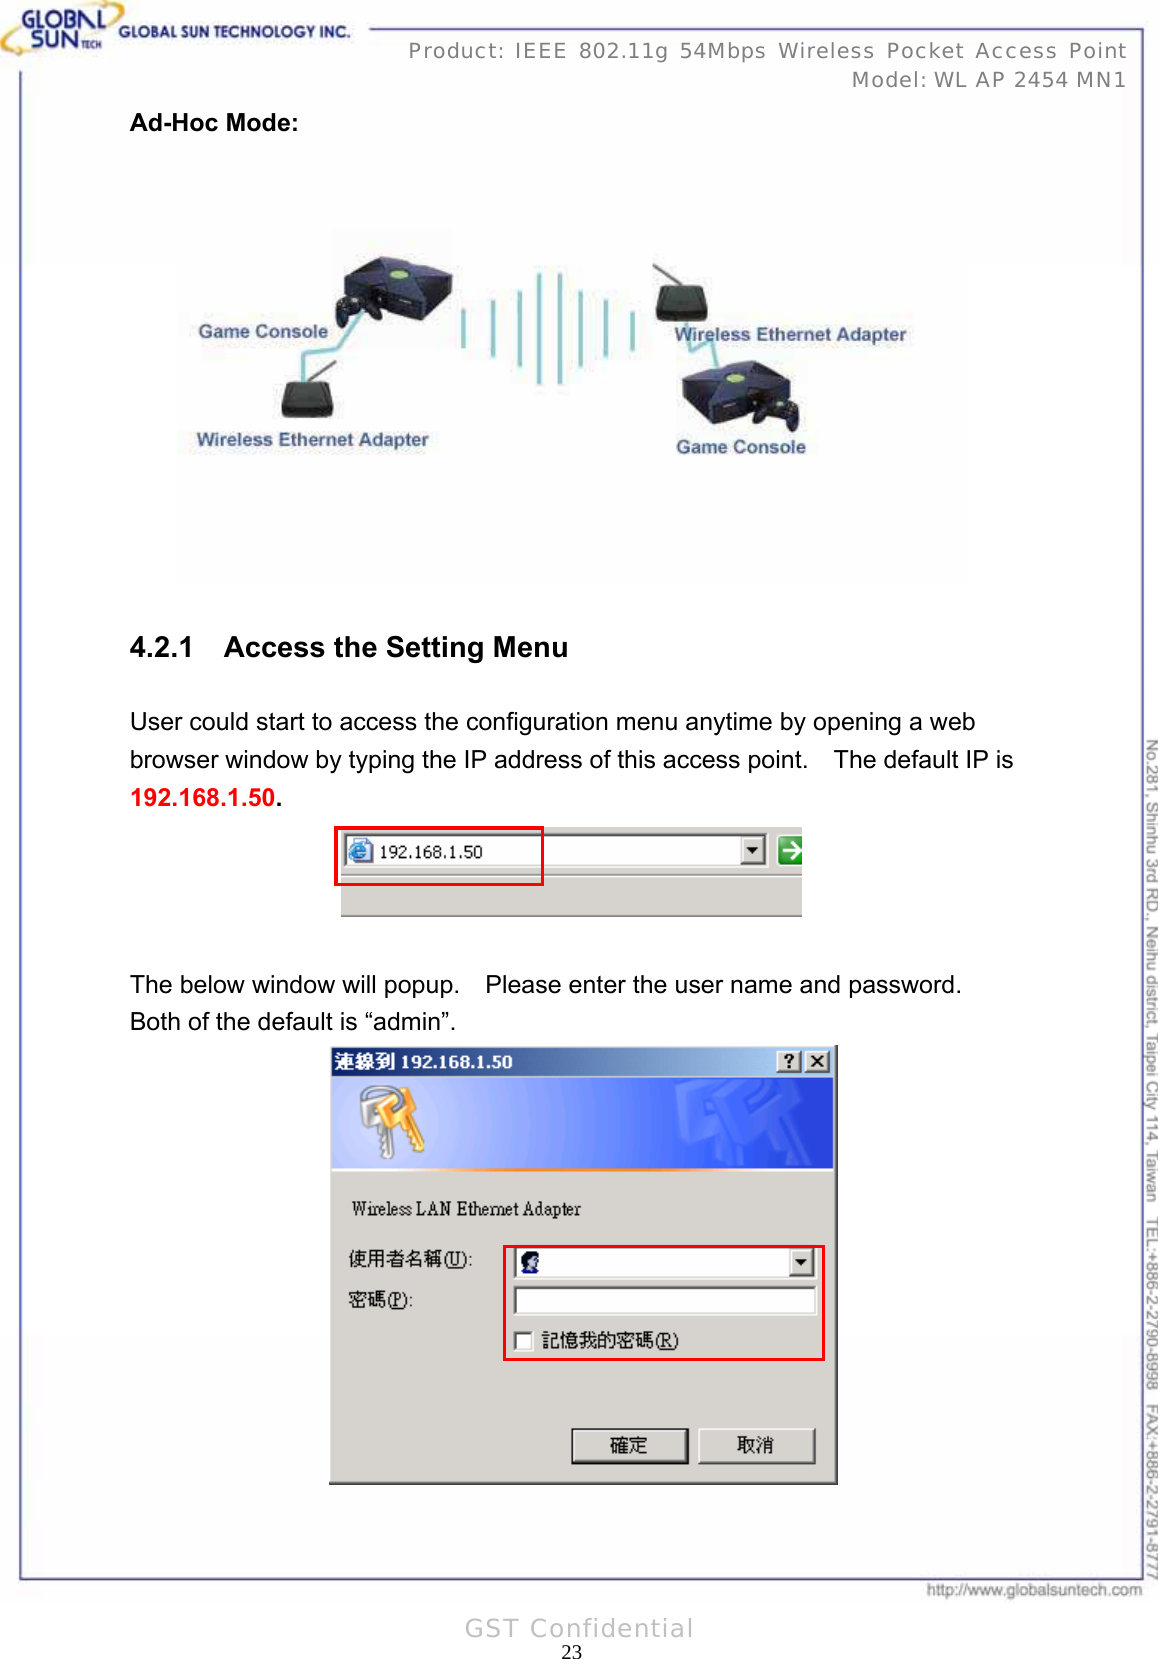   23Product: IEEE 802.11g 54Mbps Wireless Pocket Access Point Model: WL AP 2454 MN1GST Confidential Ad-Hoc Mode:  4.2.1    Access the Setting Menu User could start to access the configuration menu anytime by opening a web browser window by typing the IP address of this access point.    The default IP is 192.168.1.50.   The below window will popup.    Please enter the user name and password.   Both of the default is “admin”.           